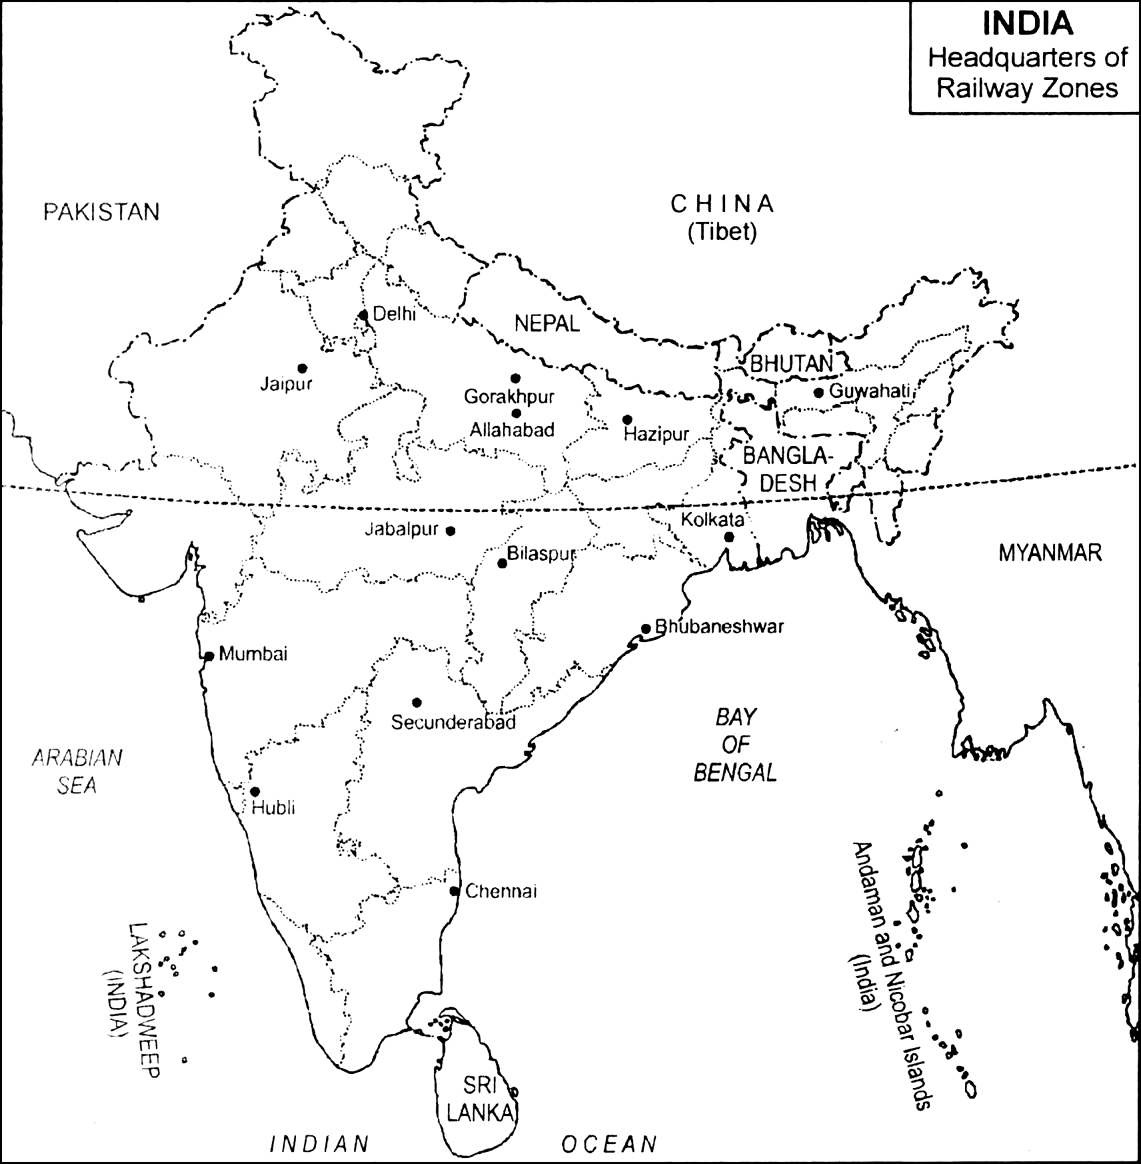 railway zones in india map pdf Name The Current Zones Of Indian Railways With Their Headquarters railway zones in india map pdf